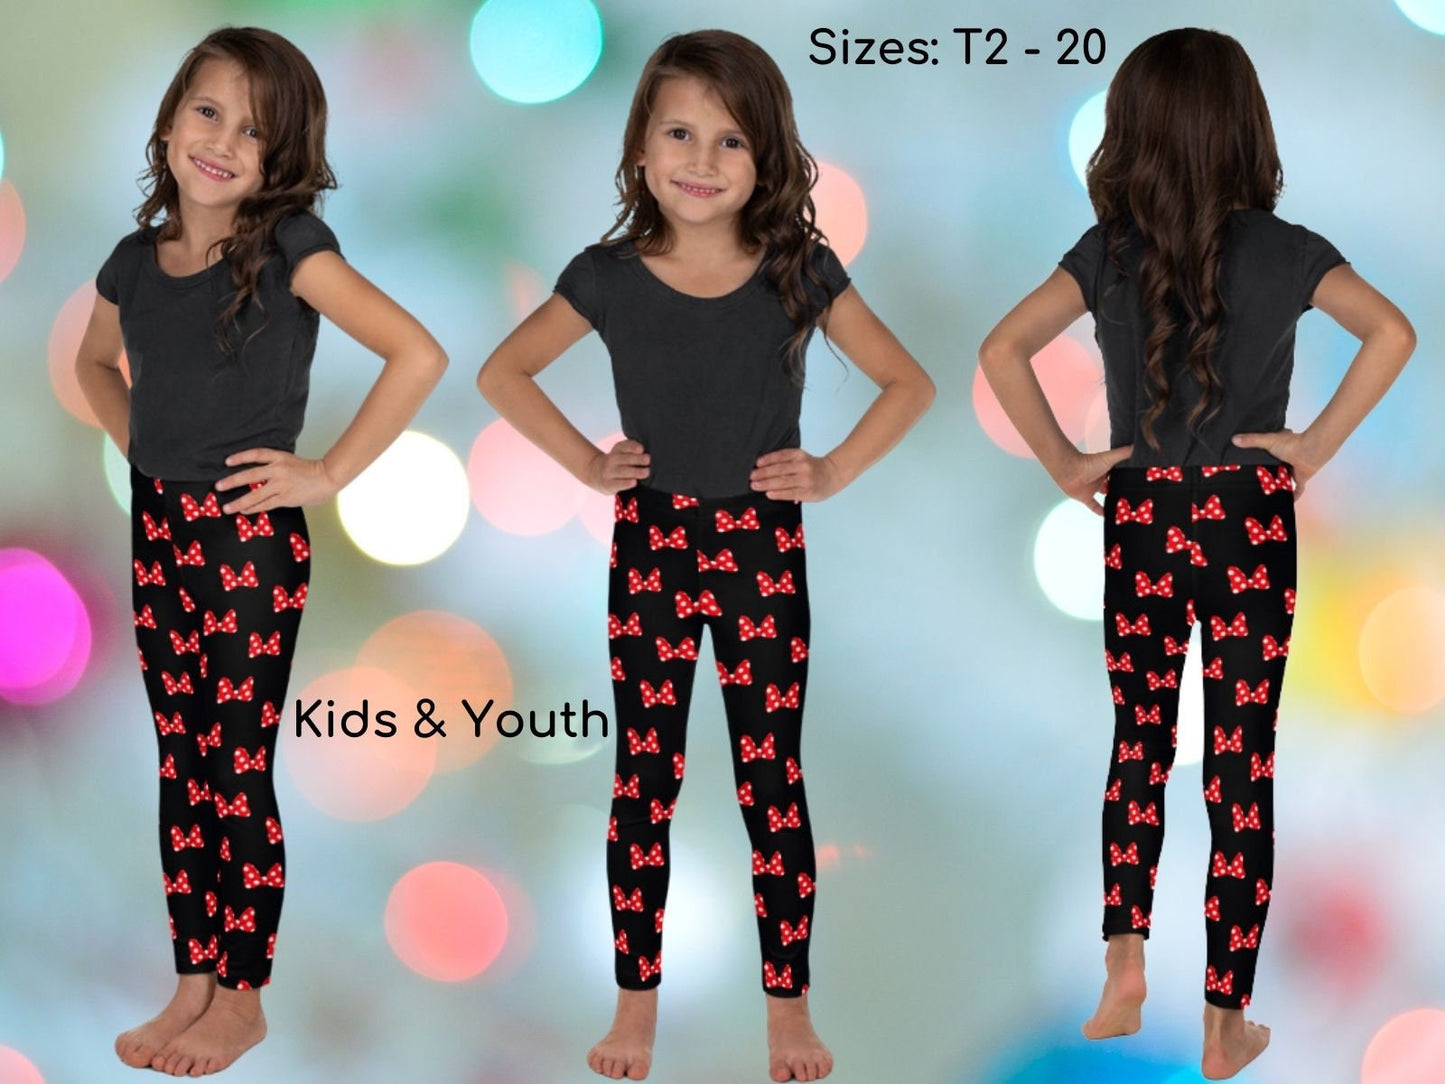 Minnie Inspired Leggings, Red Bows, Toddlers, Kids & Youth Leggings, Yoga Pants, Rash Guards, T-Shirts, Cosplay Costume, Halloween costume